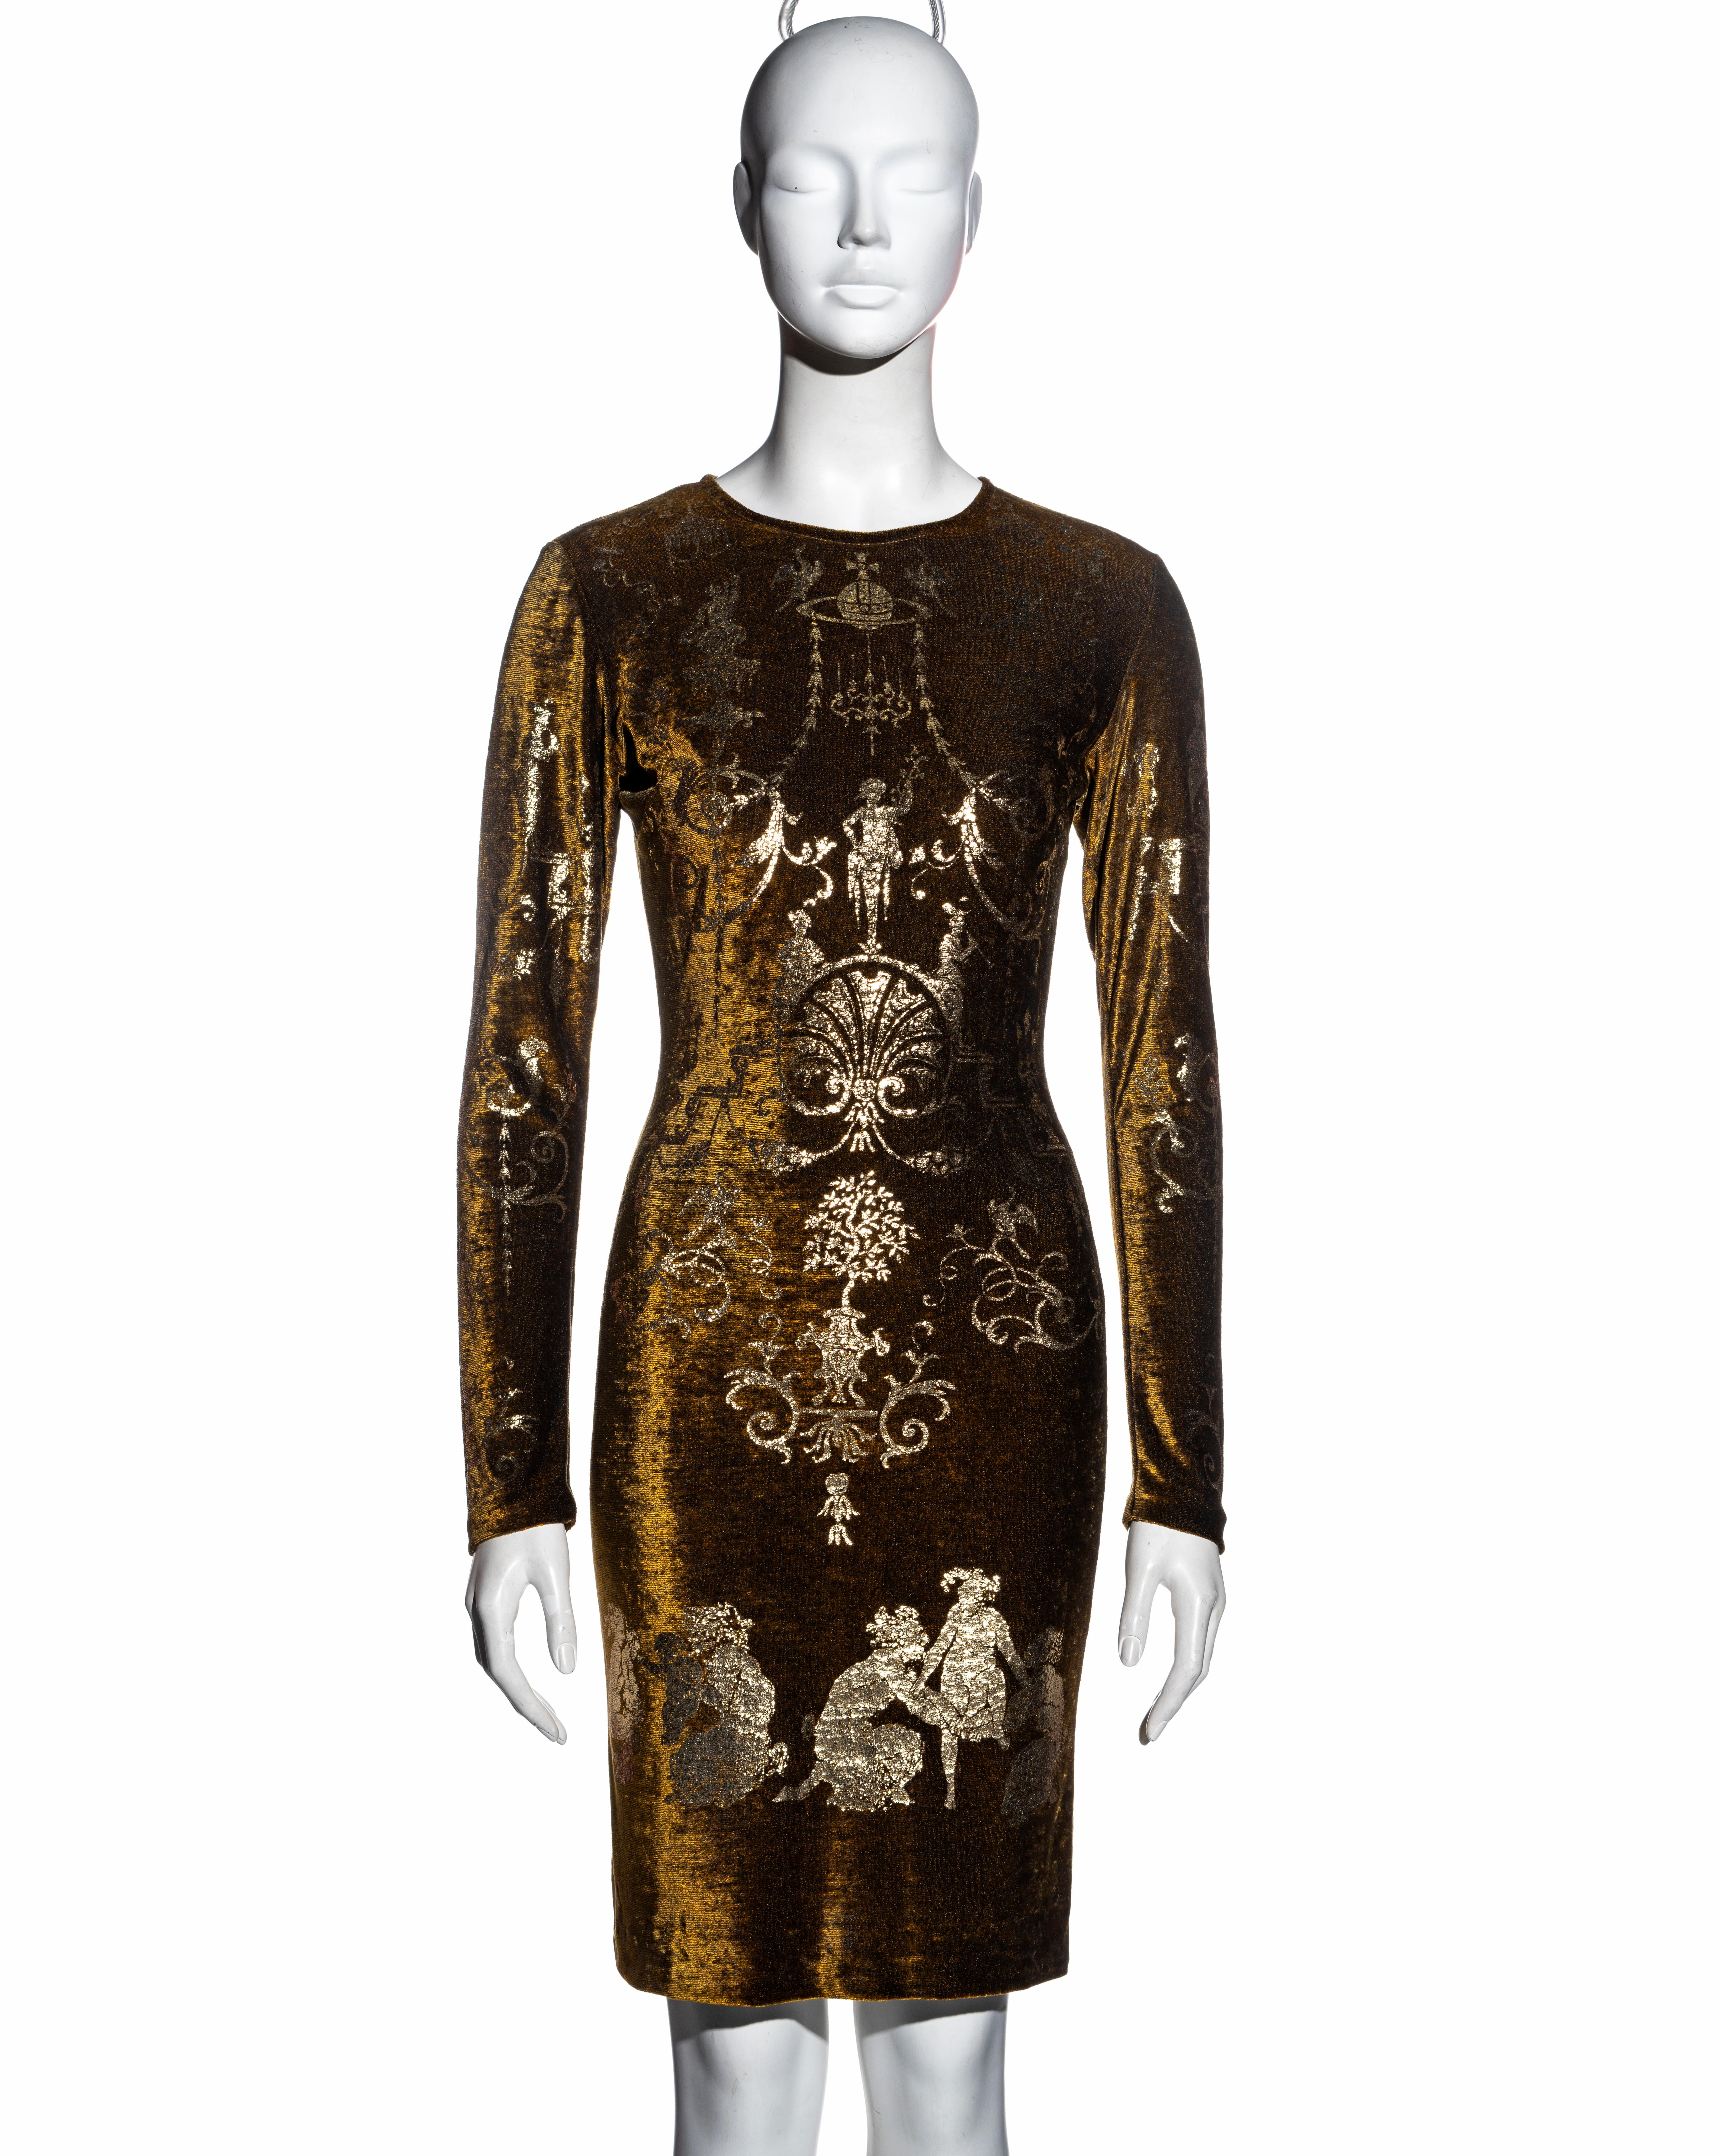 ▪ Vivienne Westwood bronze stretch-velvet evening dress
▪ Gold foil neoclassical print inspired by Andre-Charles Boulle
▪ Concealed zipper at center-back 
▪ Size Medium
▪ Fall-Winter 1990
▪ 70% Rayon, 30% Nylon
▪ Made in England